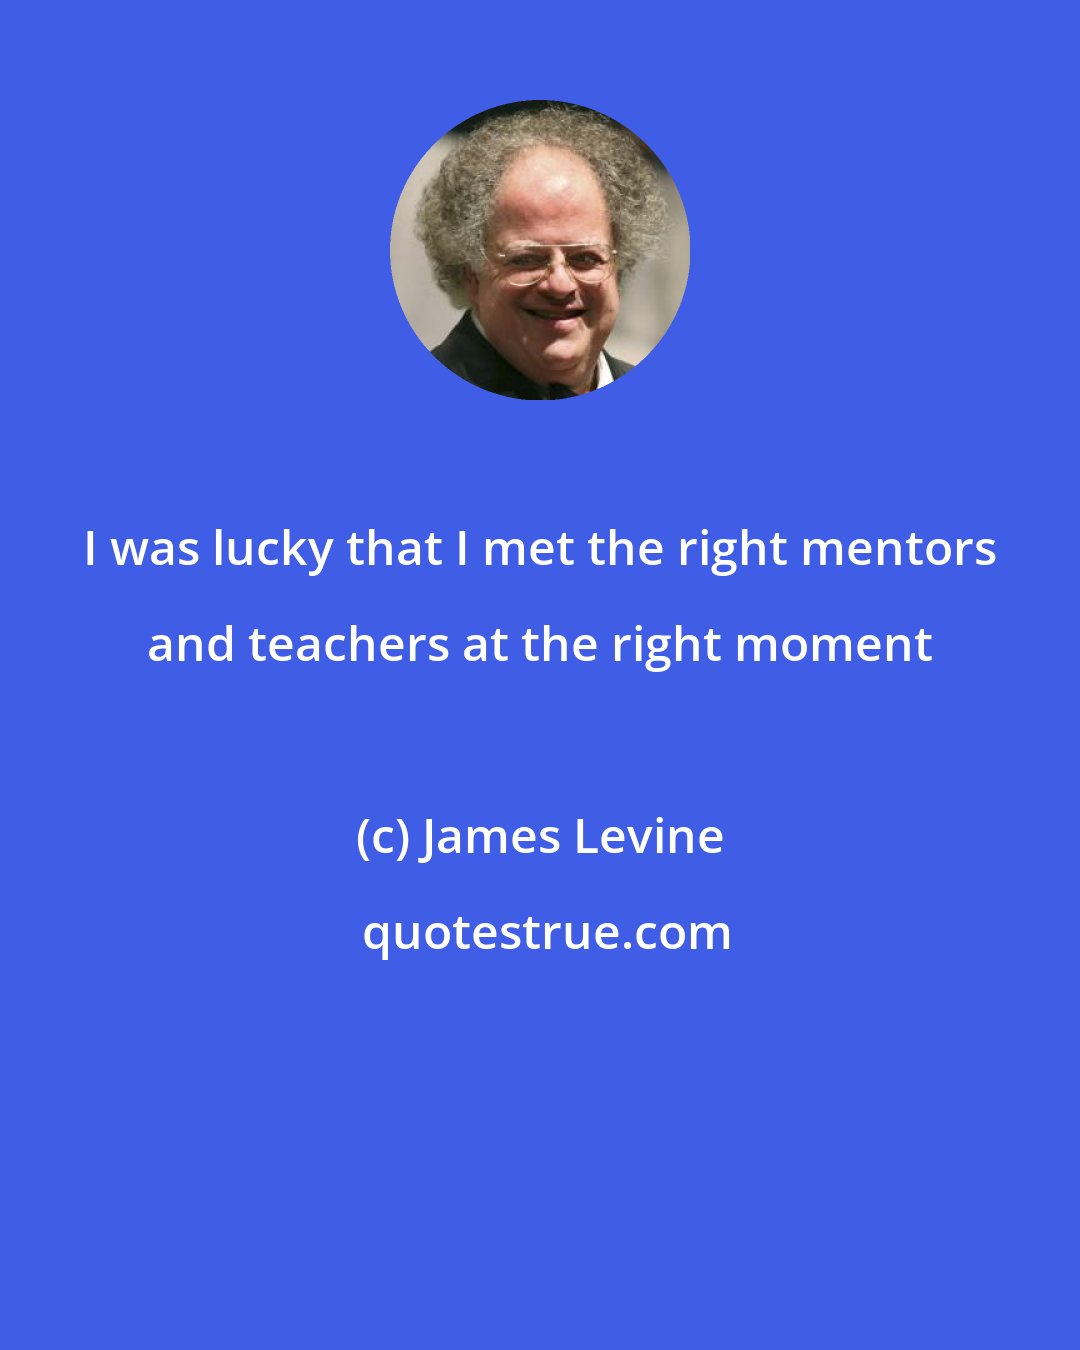 James Levine: I was lucky that I met the right mentors and teachers at the right moment